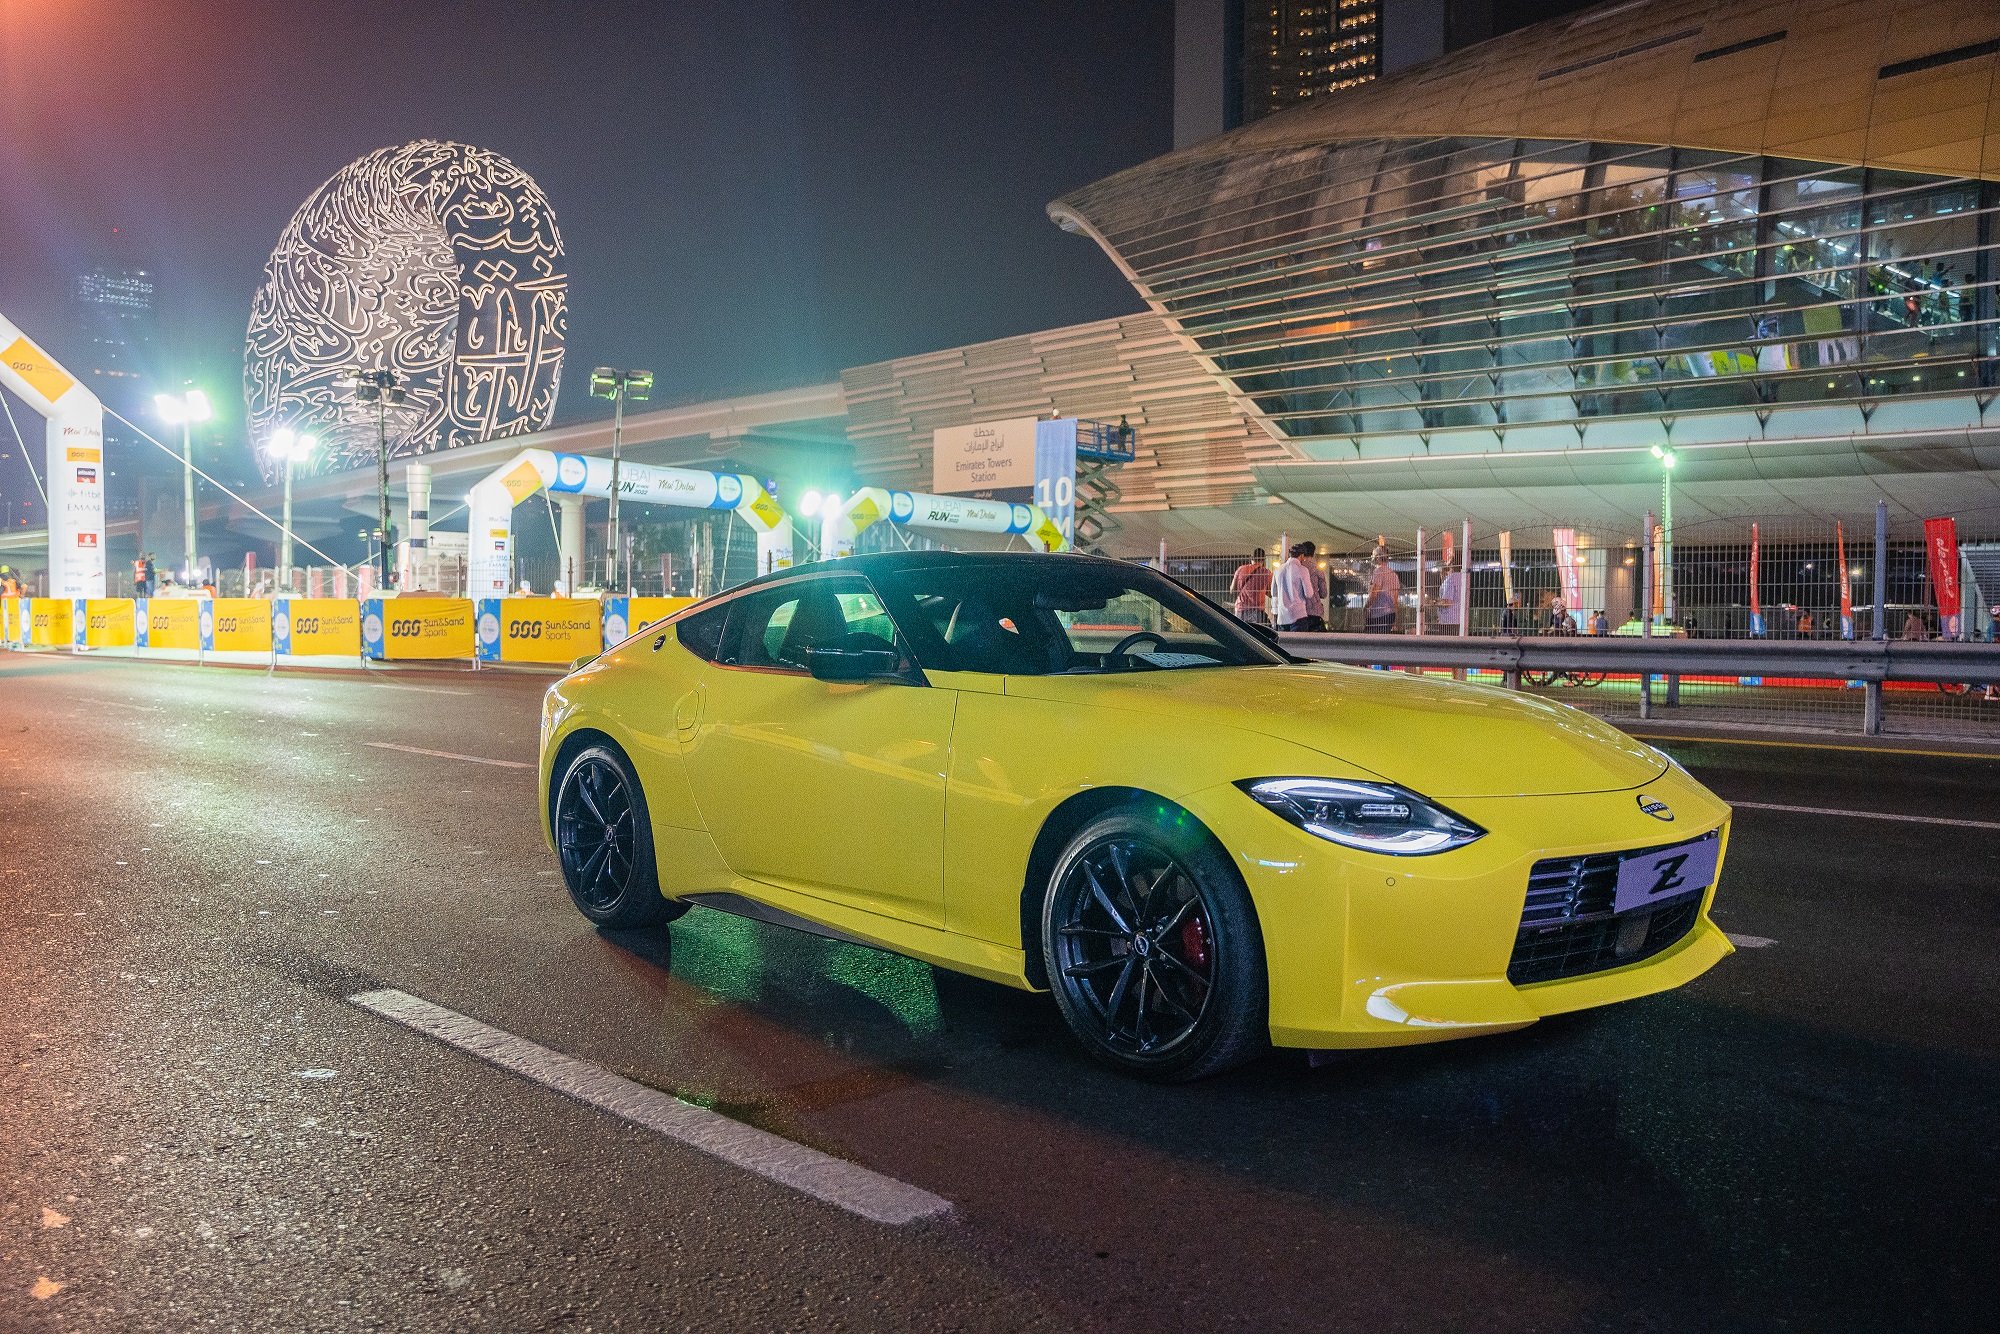 Arabian Automobiles Nissan, the official partner of 2022 Dubai Run, leads the world's largest fun run with the recently launched Nissan Z